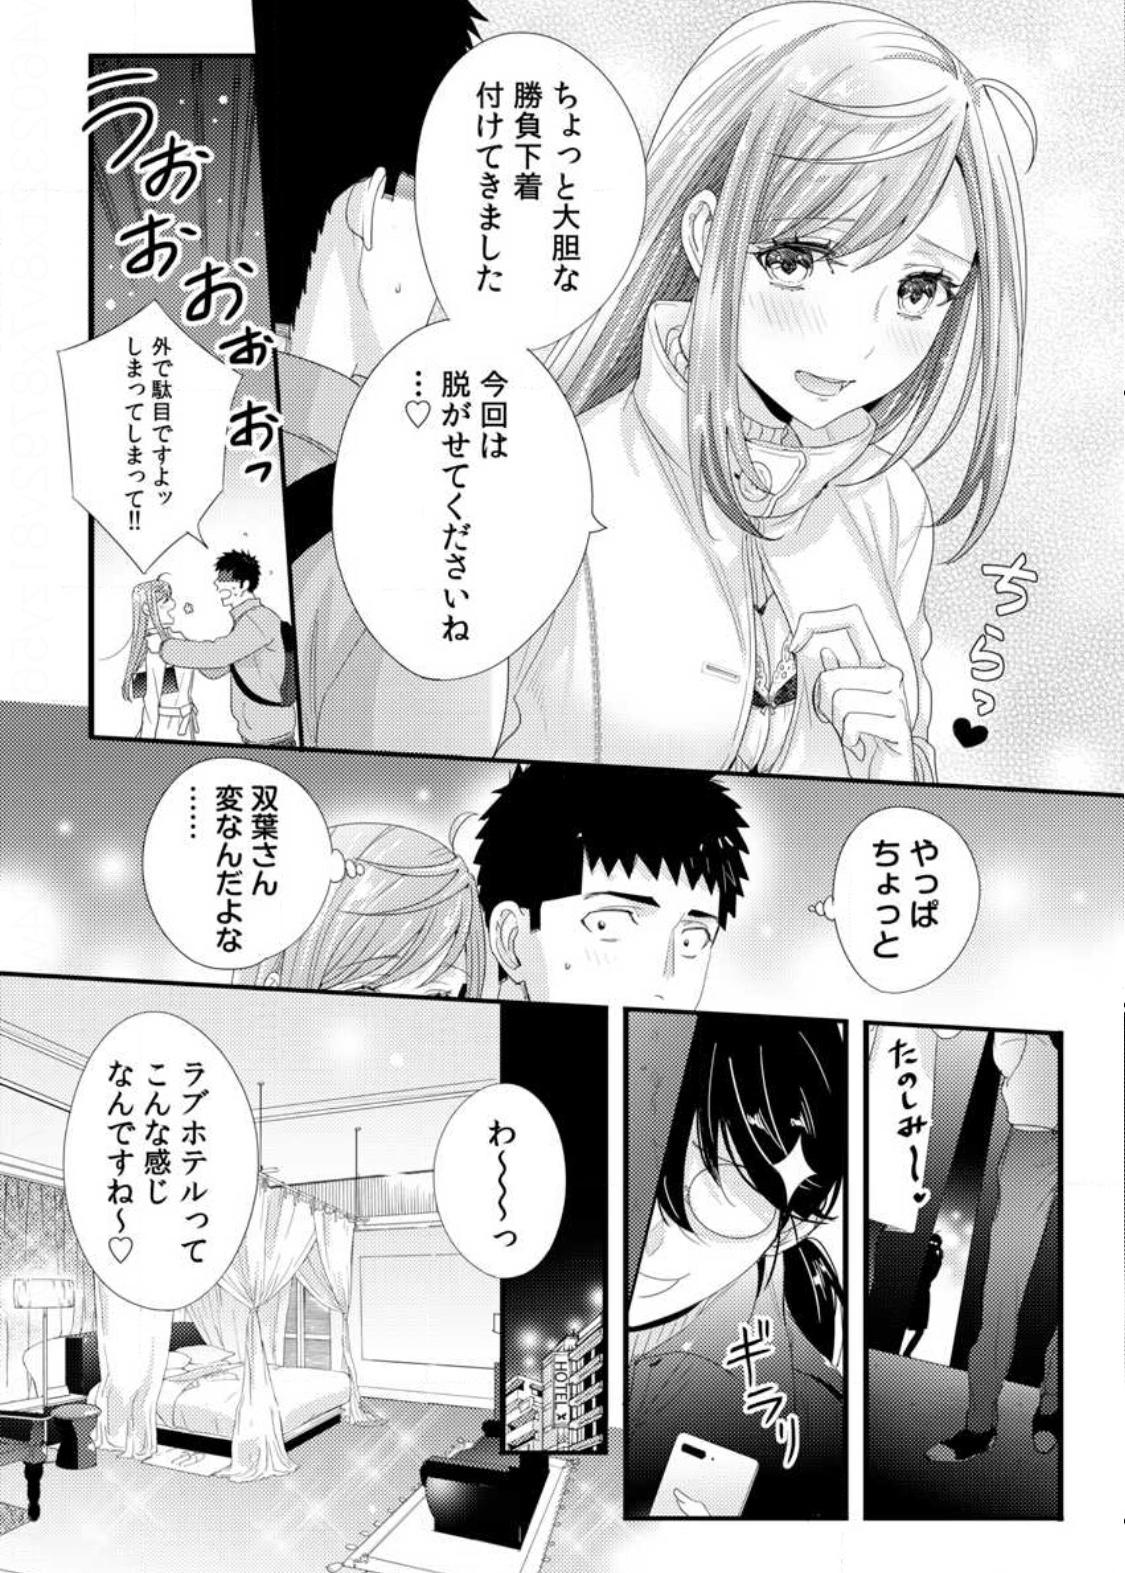 Please Let Me Hold You Futaba-San! Ch. 1-4 89